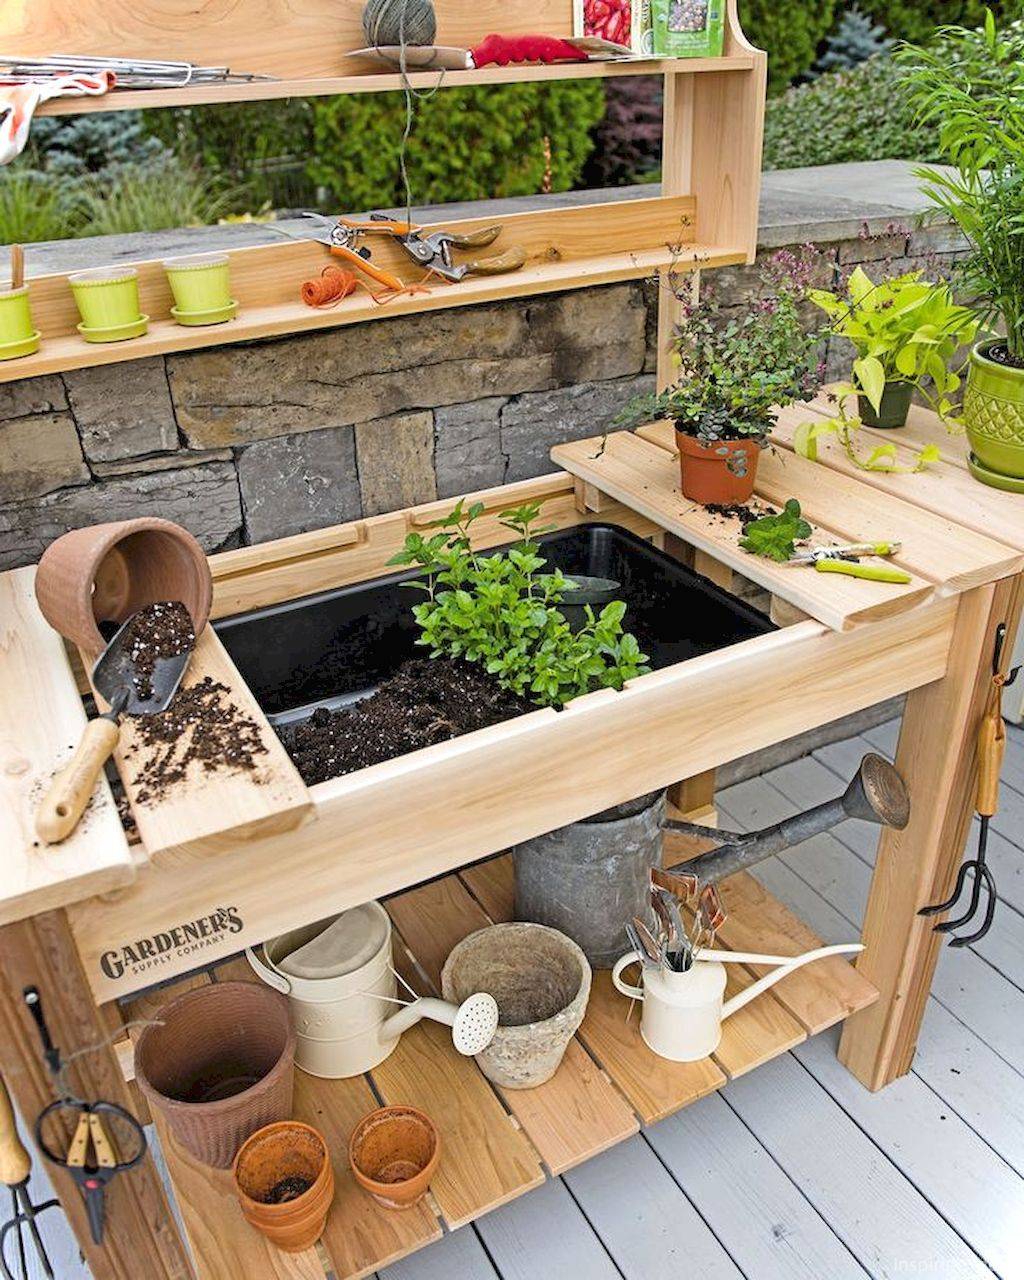 A Weekend Free Potting Bench Plans